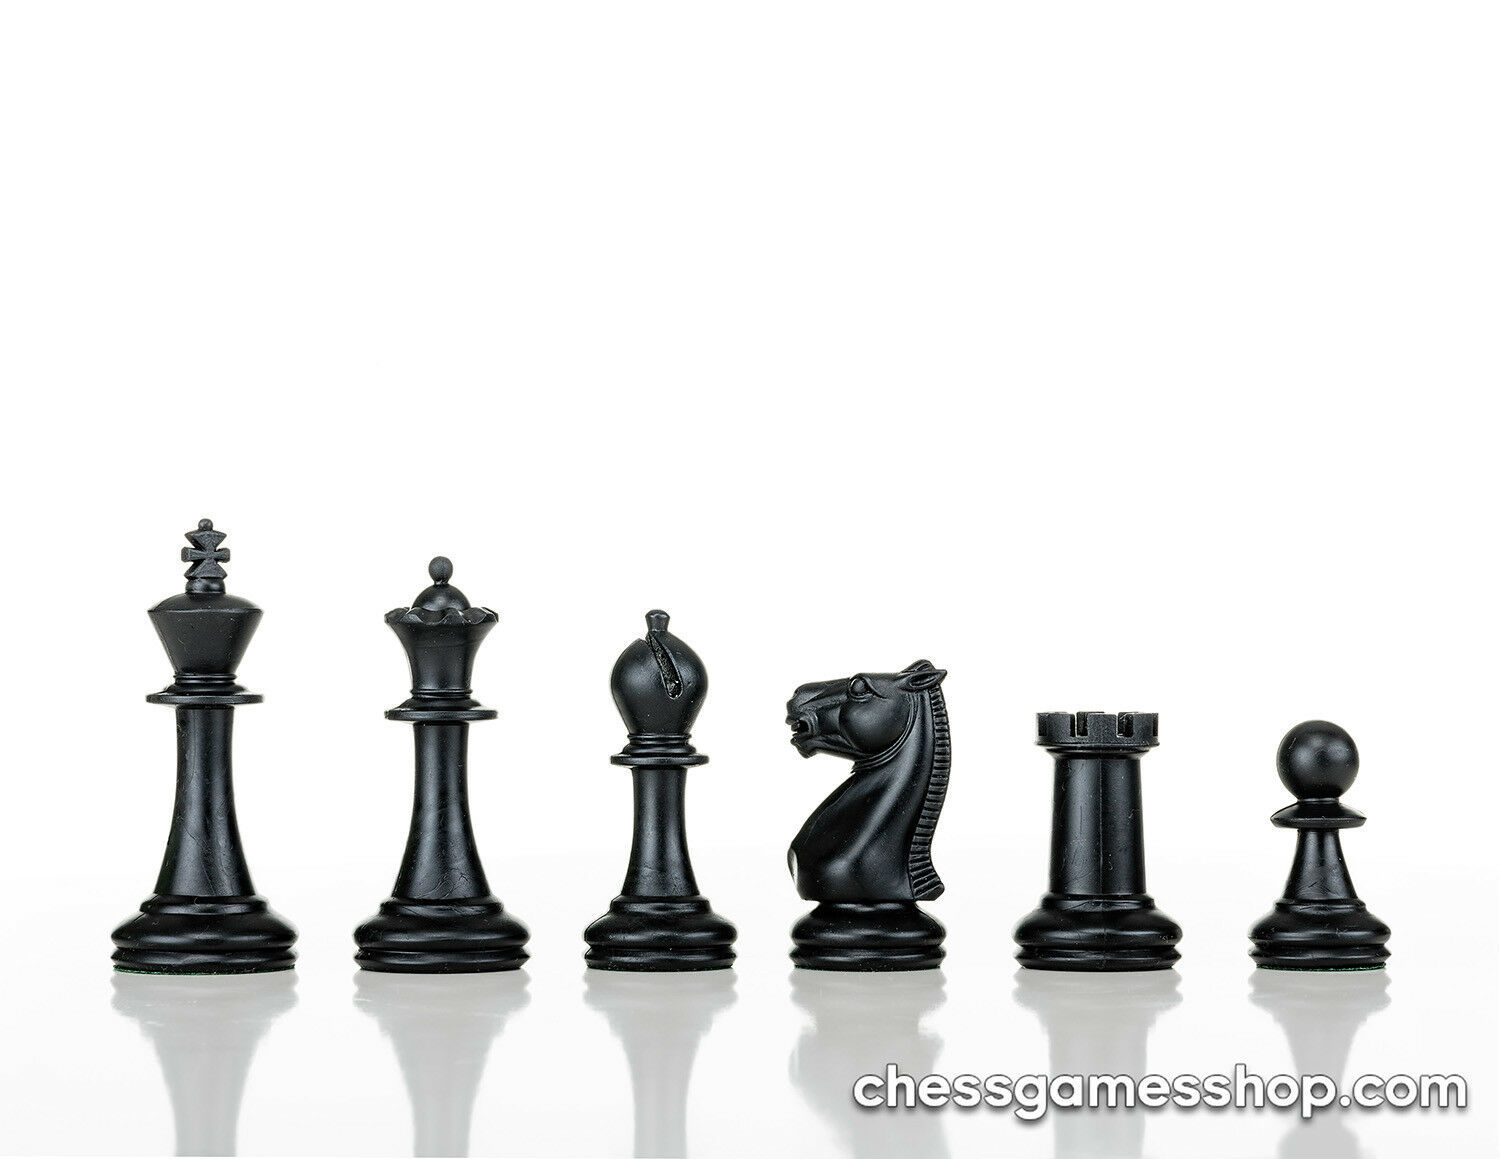 JigChess Chess Set - chess board jigsaw puzzle, Plastic chess pieces -Great  Gift